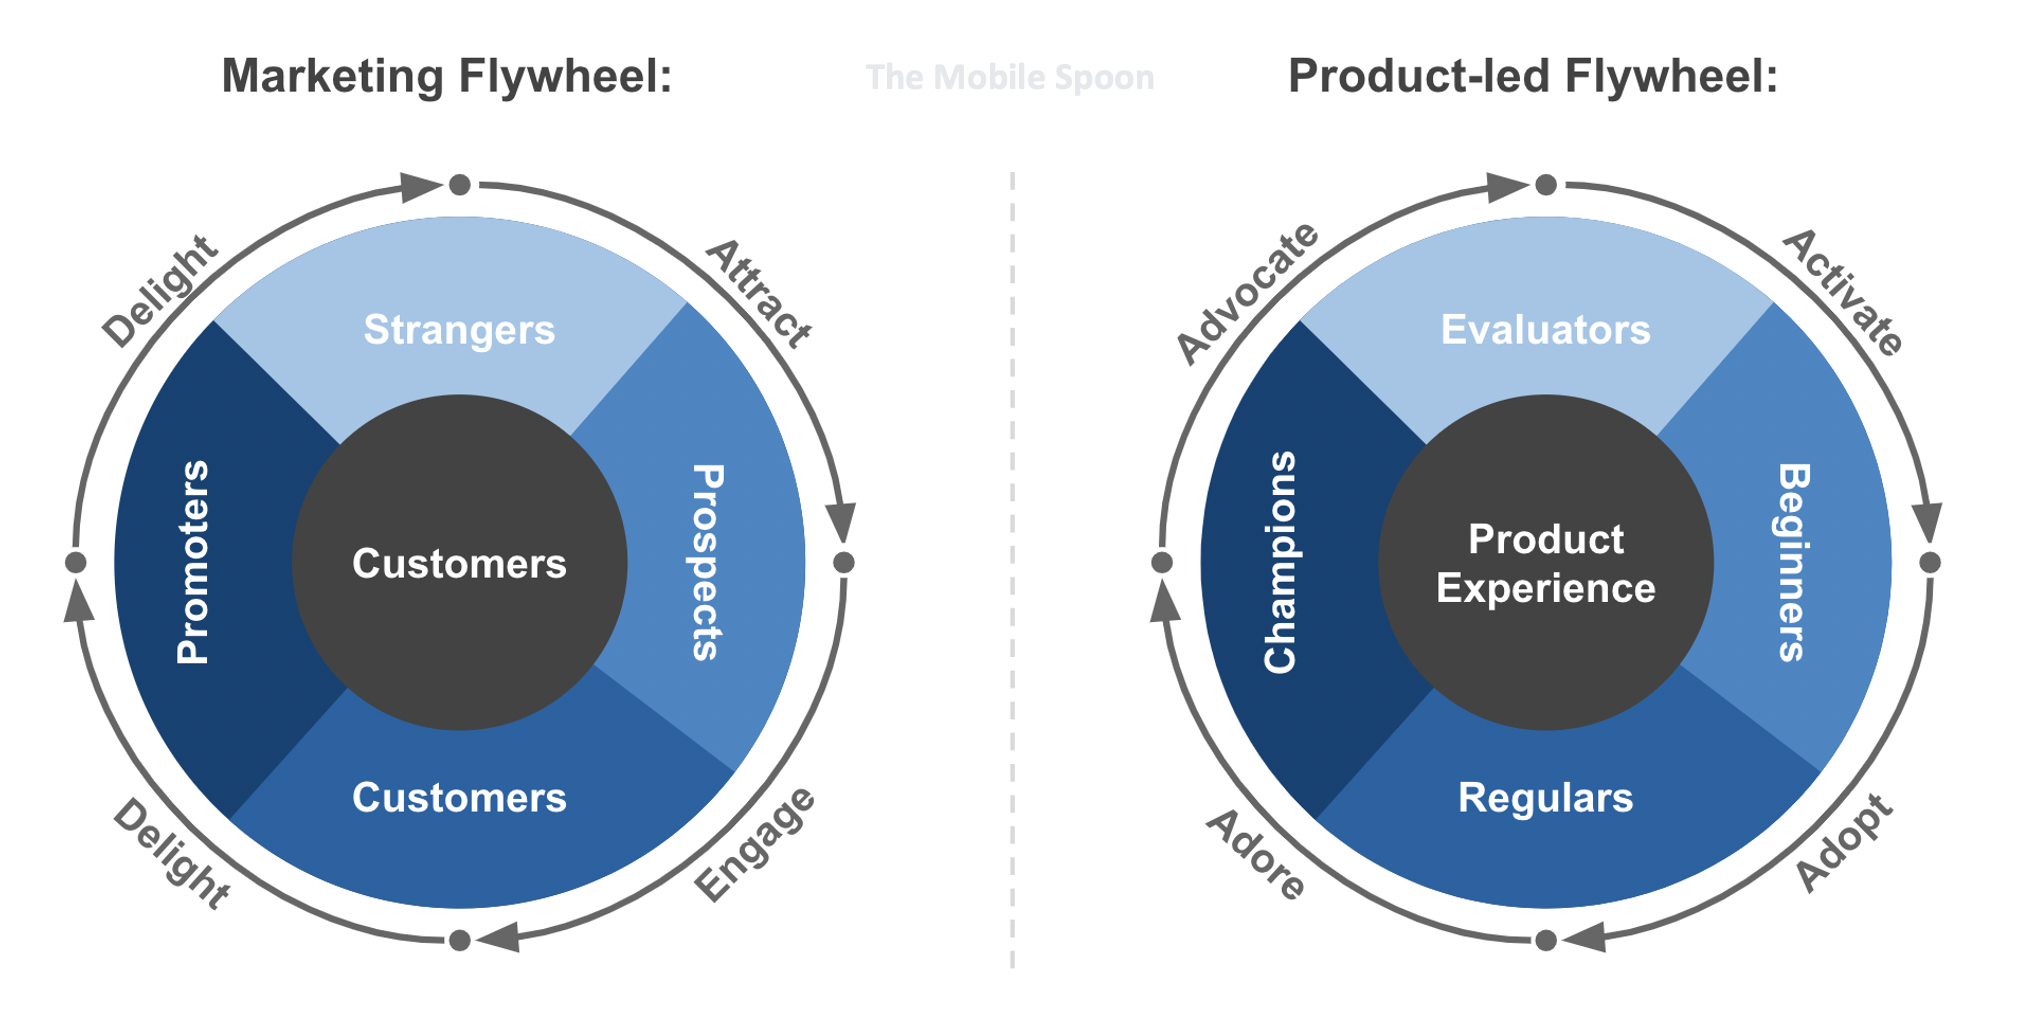 Product experience. Product lead growth. Flywheel маркетинг. Product lead marketing. Jim Collins Flywheel examples.